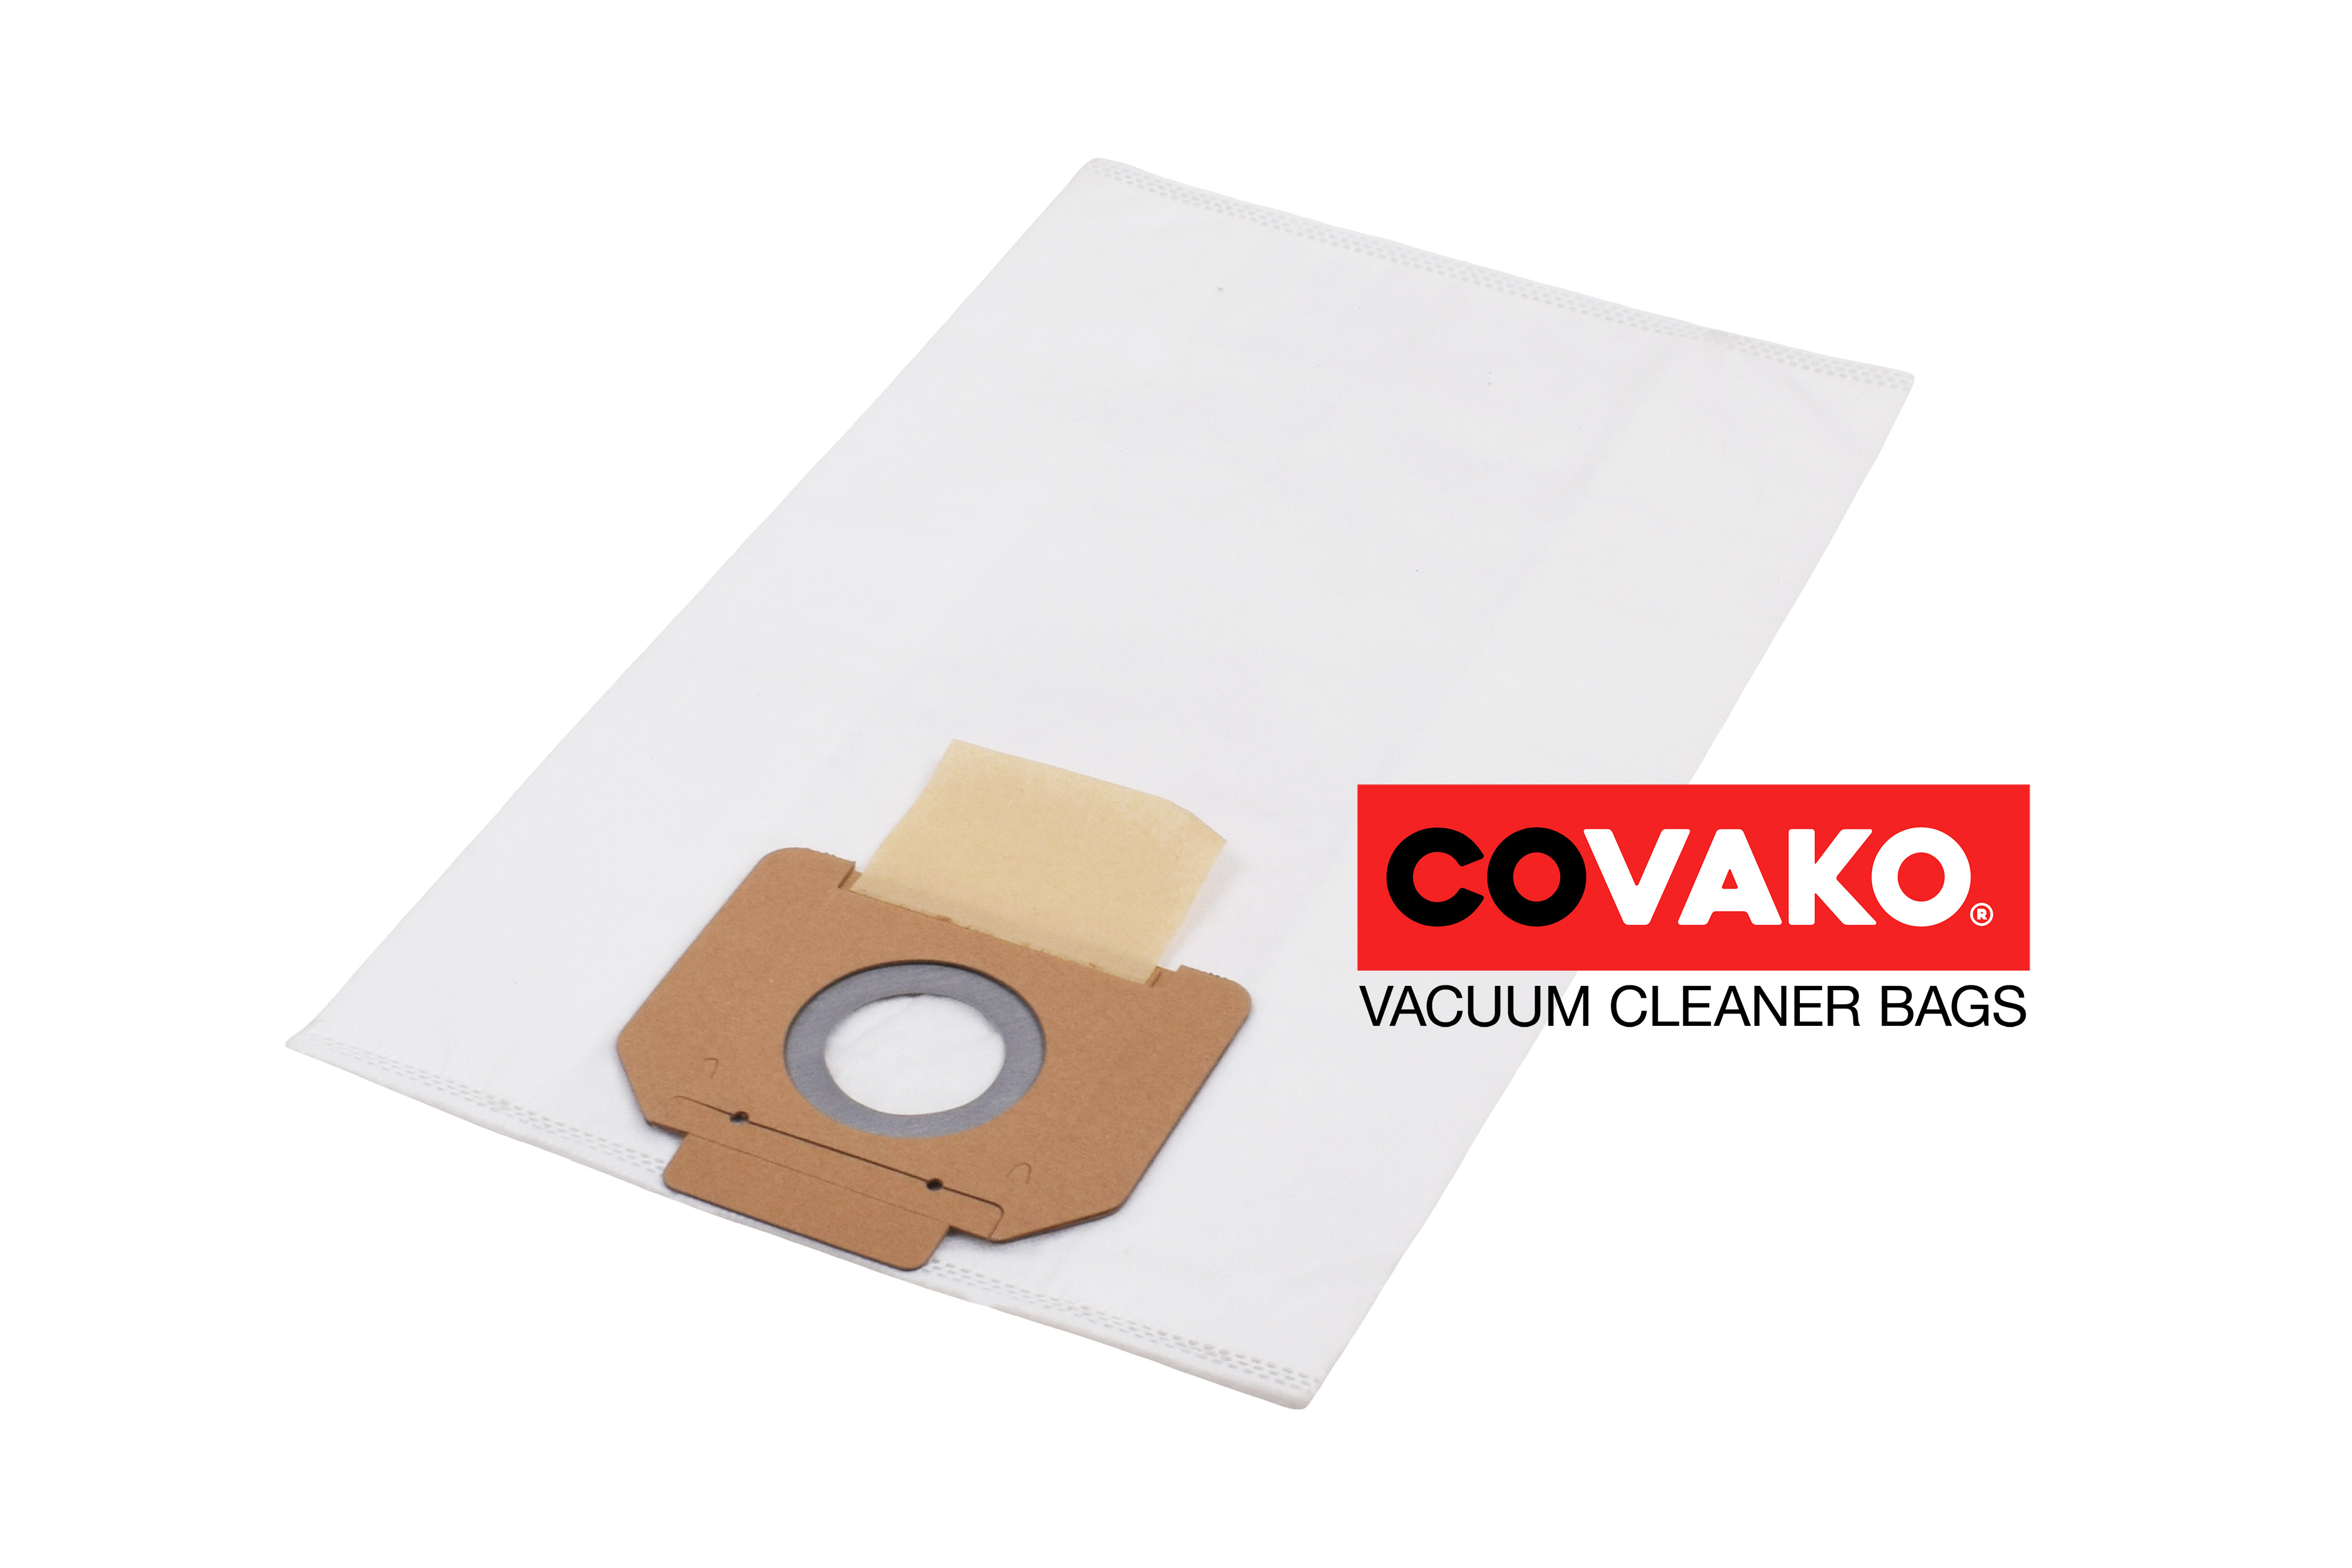 DiBo Windly 202 IPC / Synthesis - DiBo vacuum cleaner bags